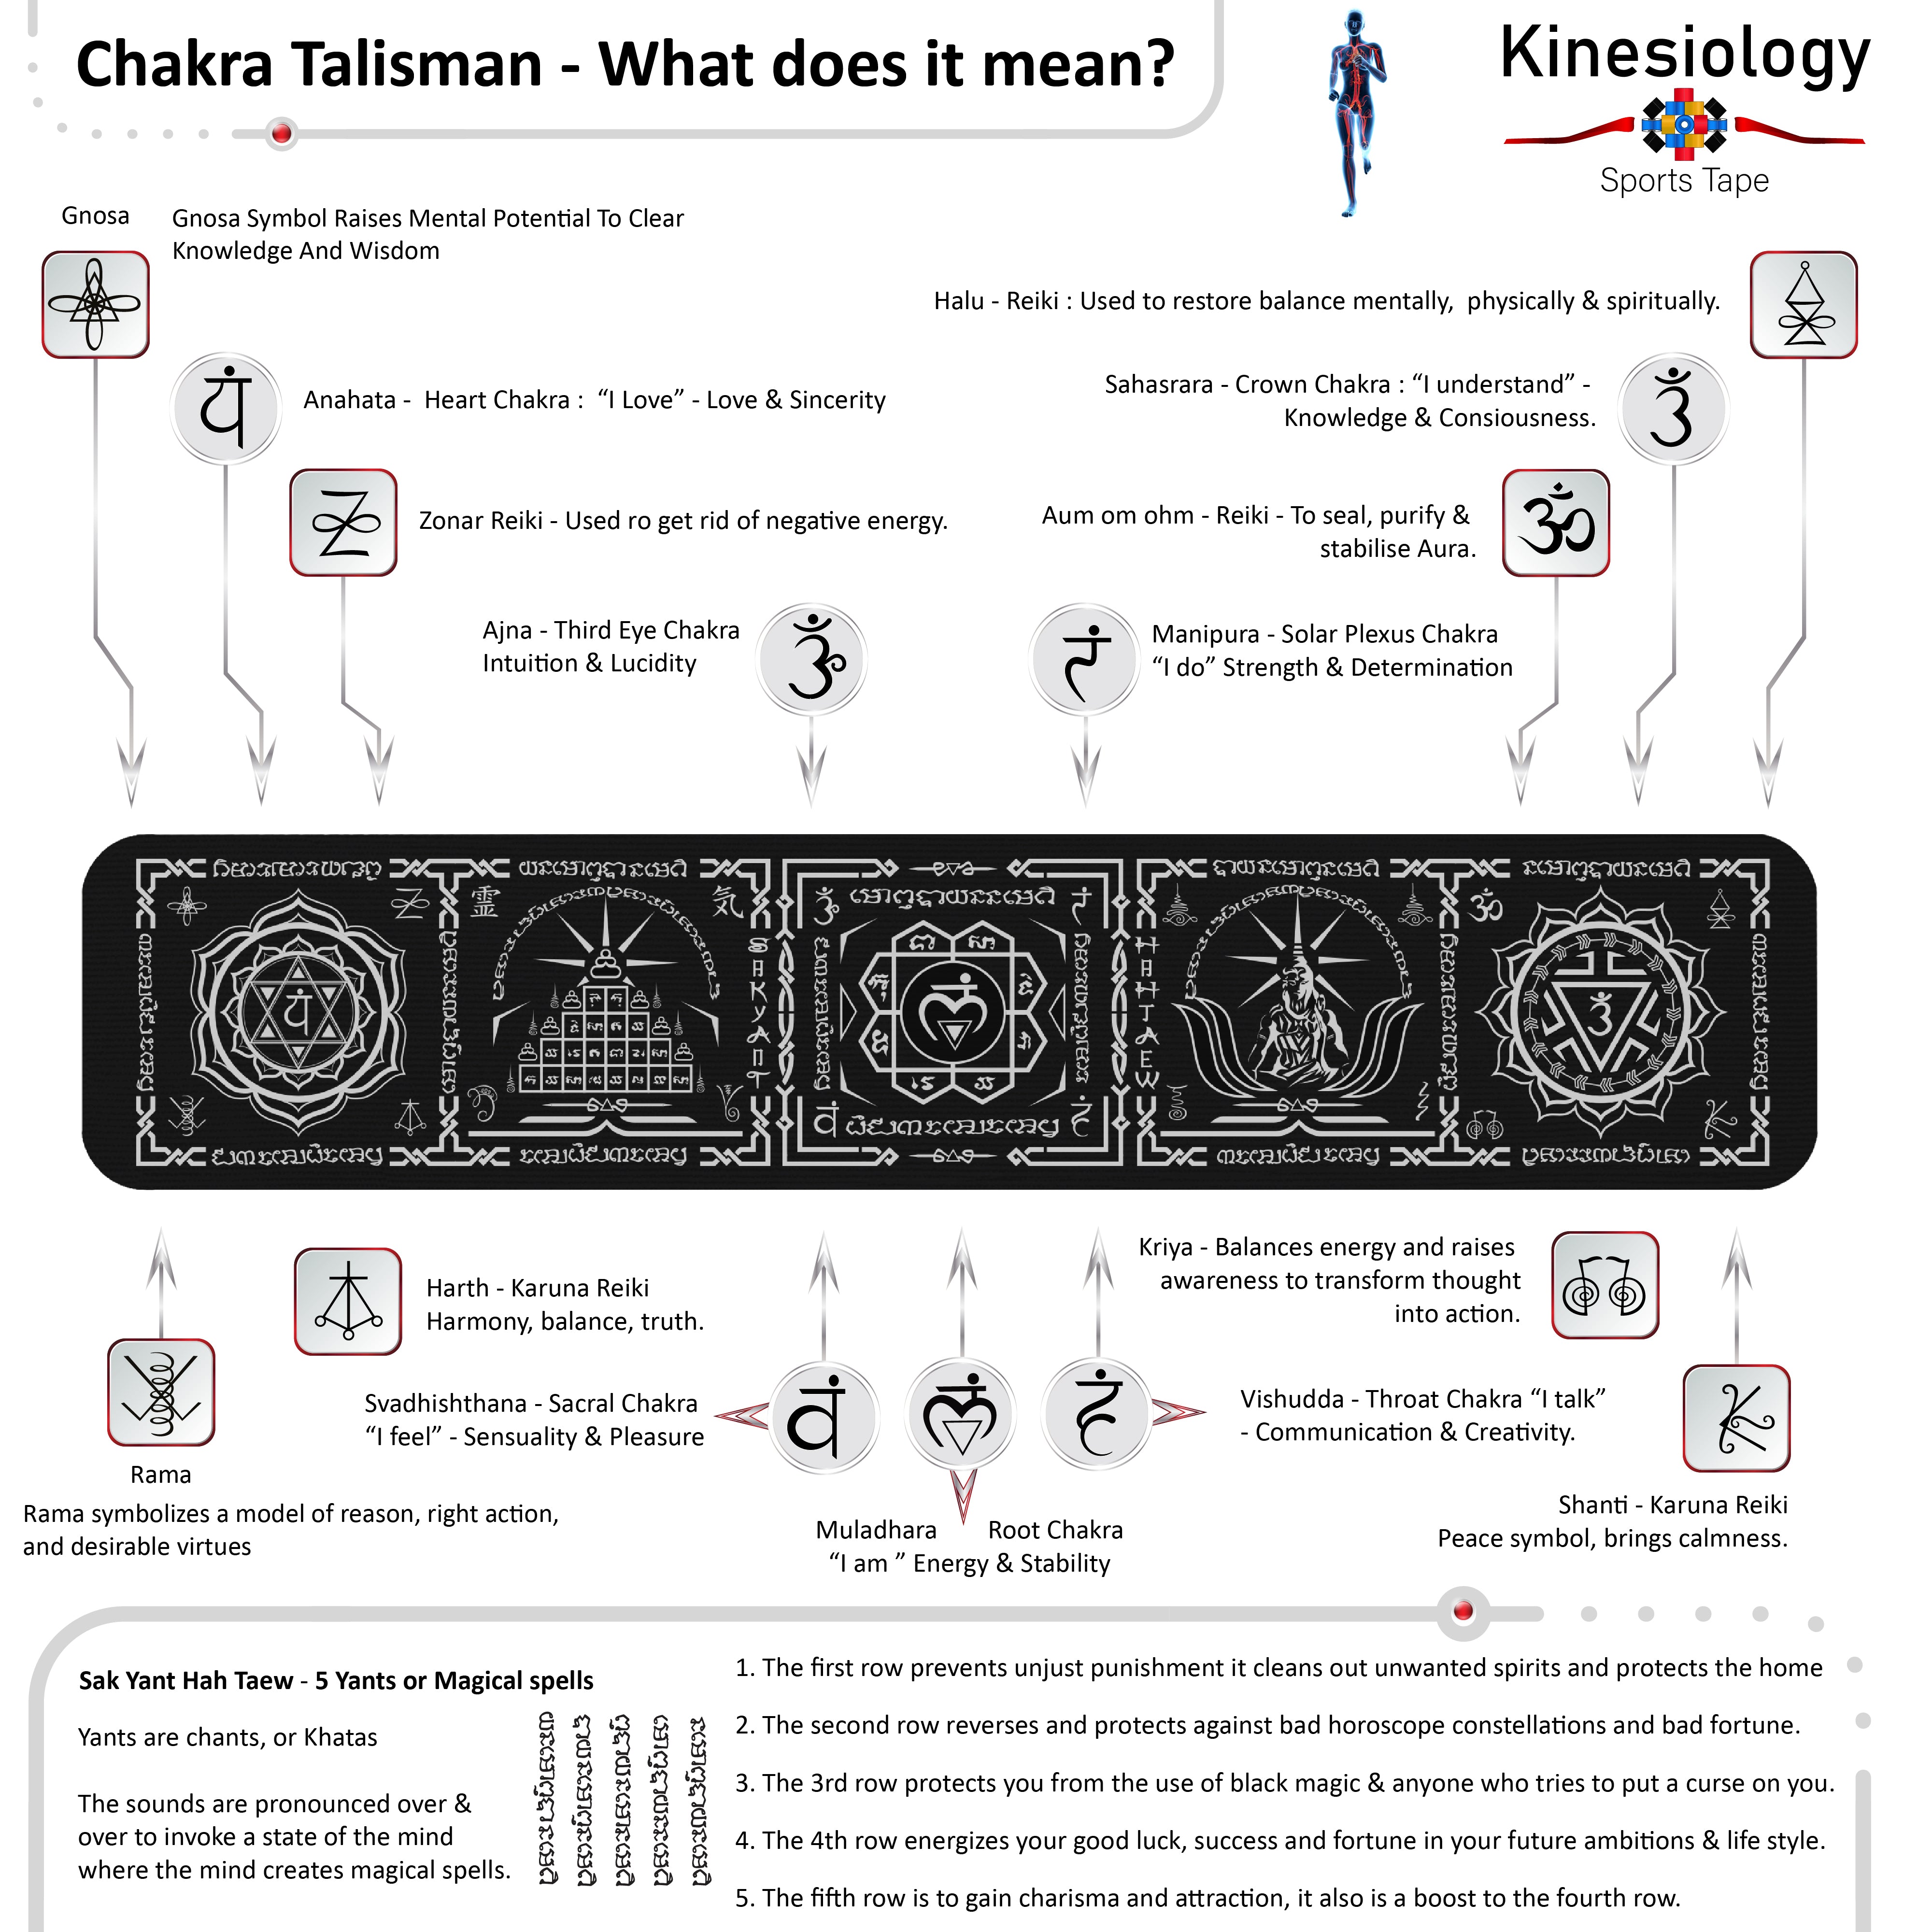 Black Kinesiology Tape Pre Cut with Dispenser - Talisman - Chakra - Horizontal Design - Athletic Sports Tape - For Healing and Recovery